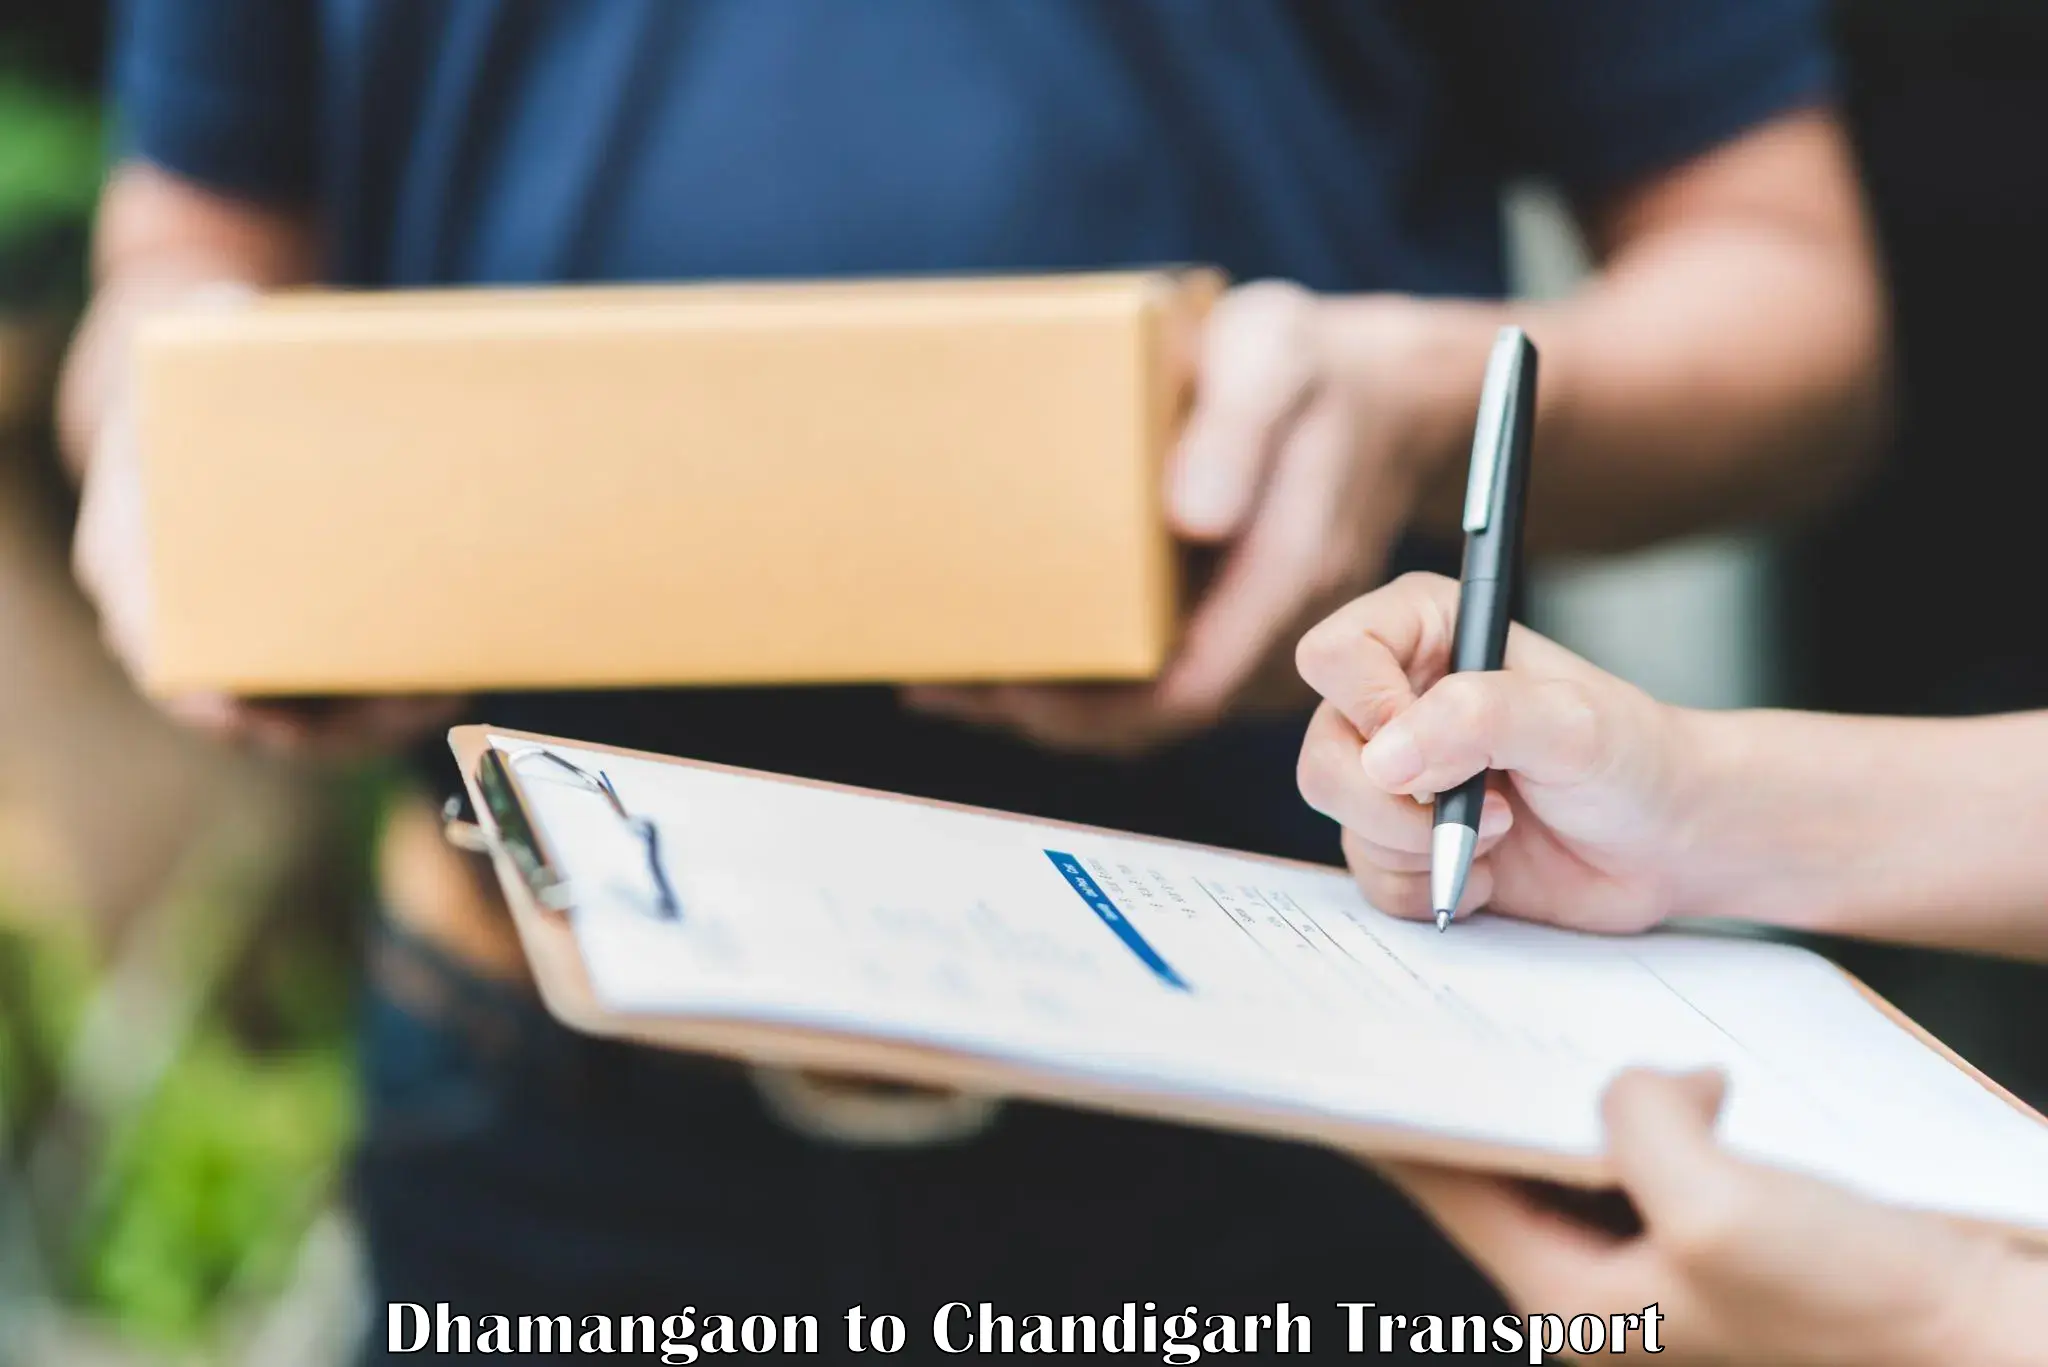 Nearby transport service Dhamangaon to Chandigarh